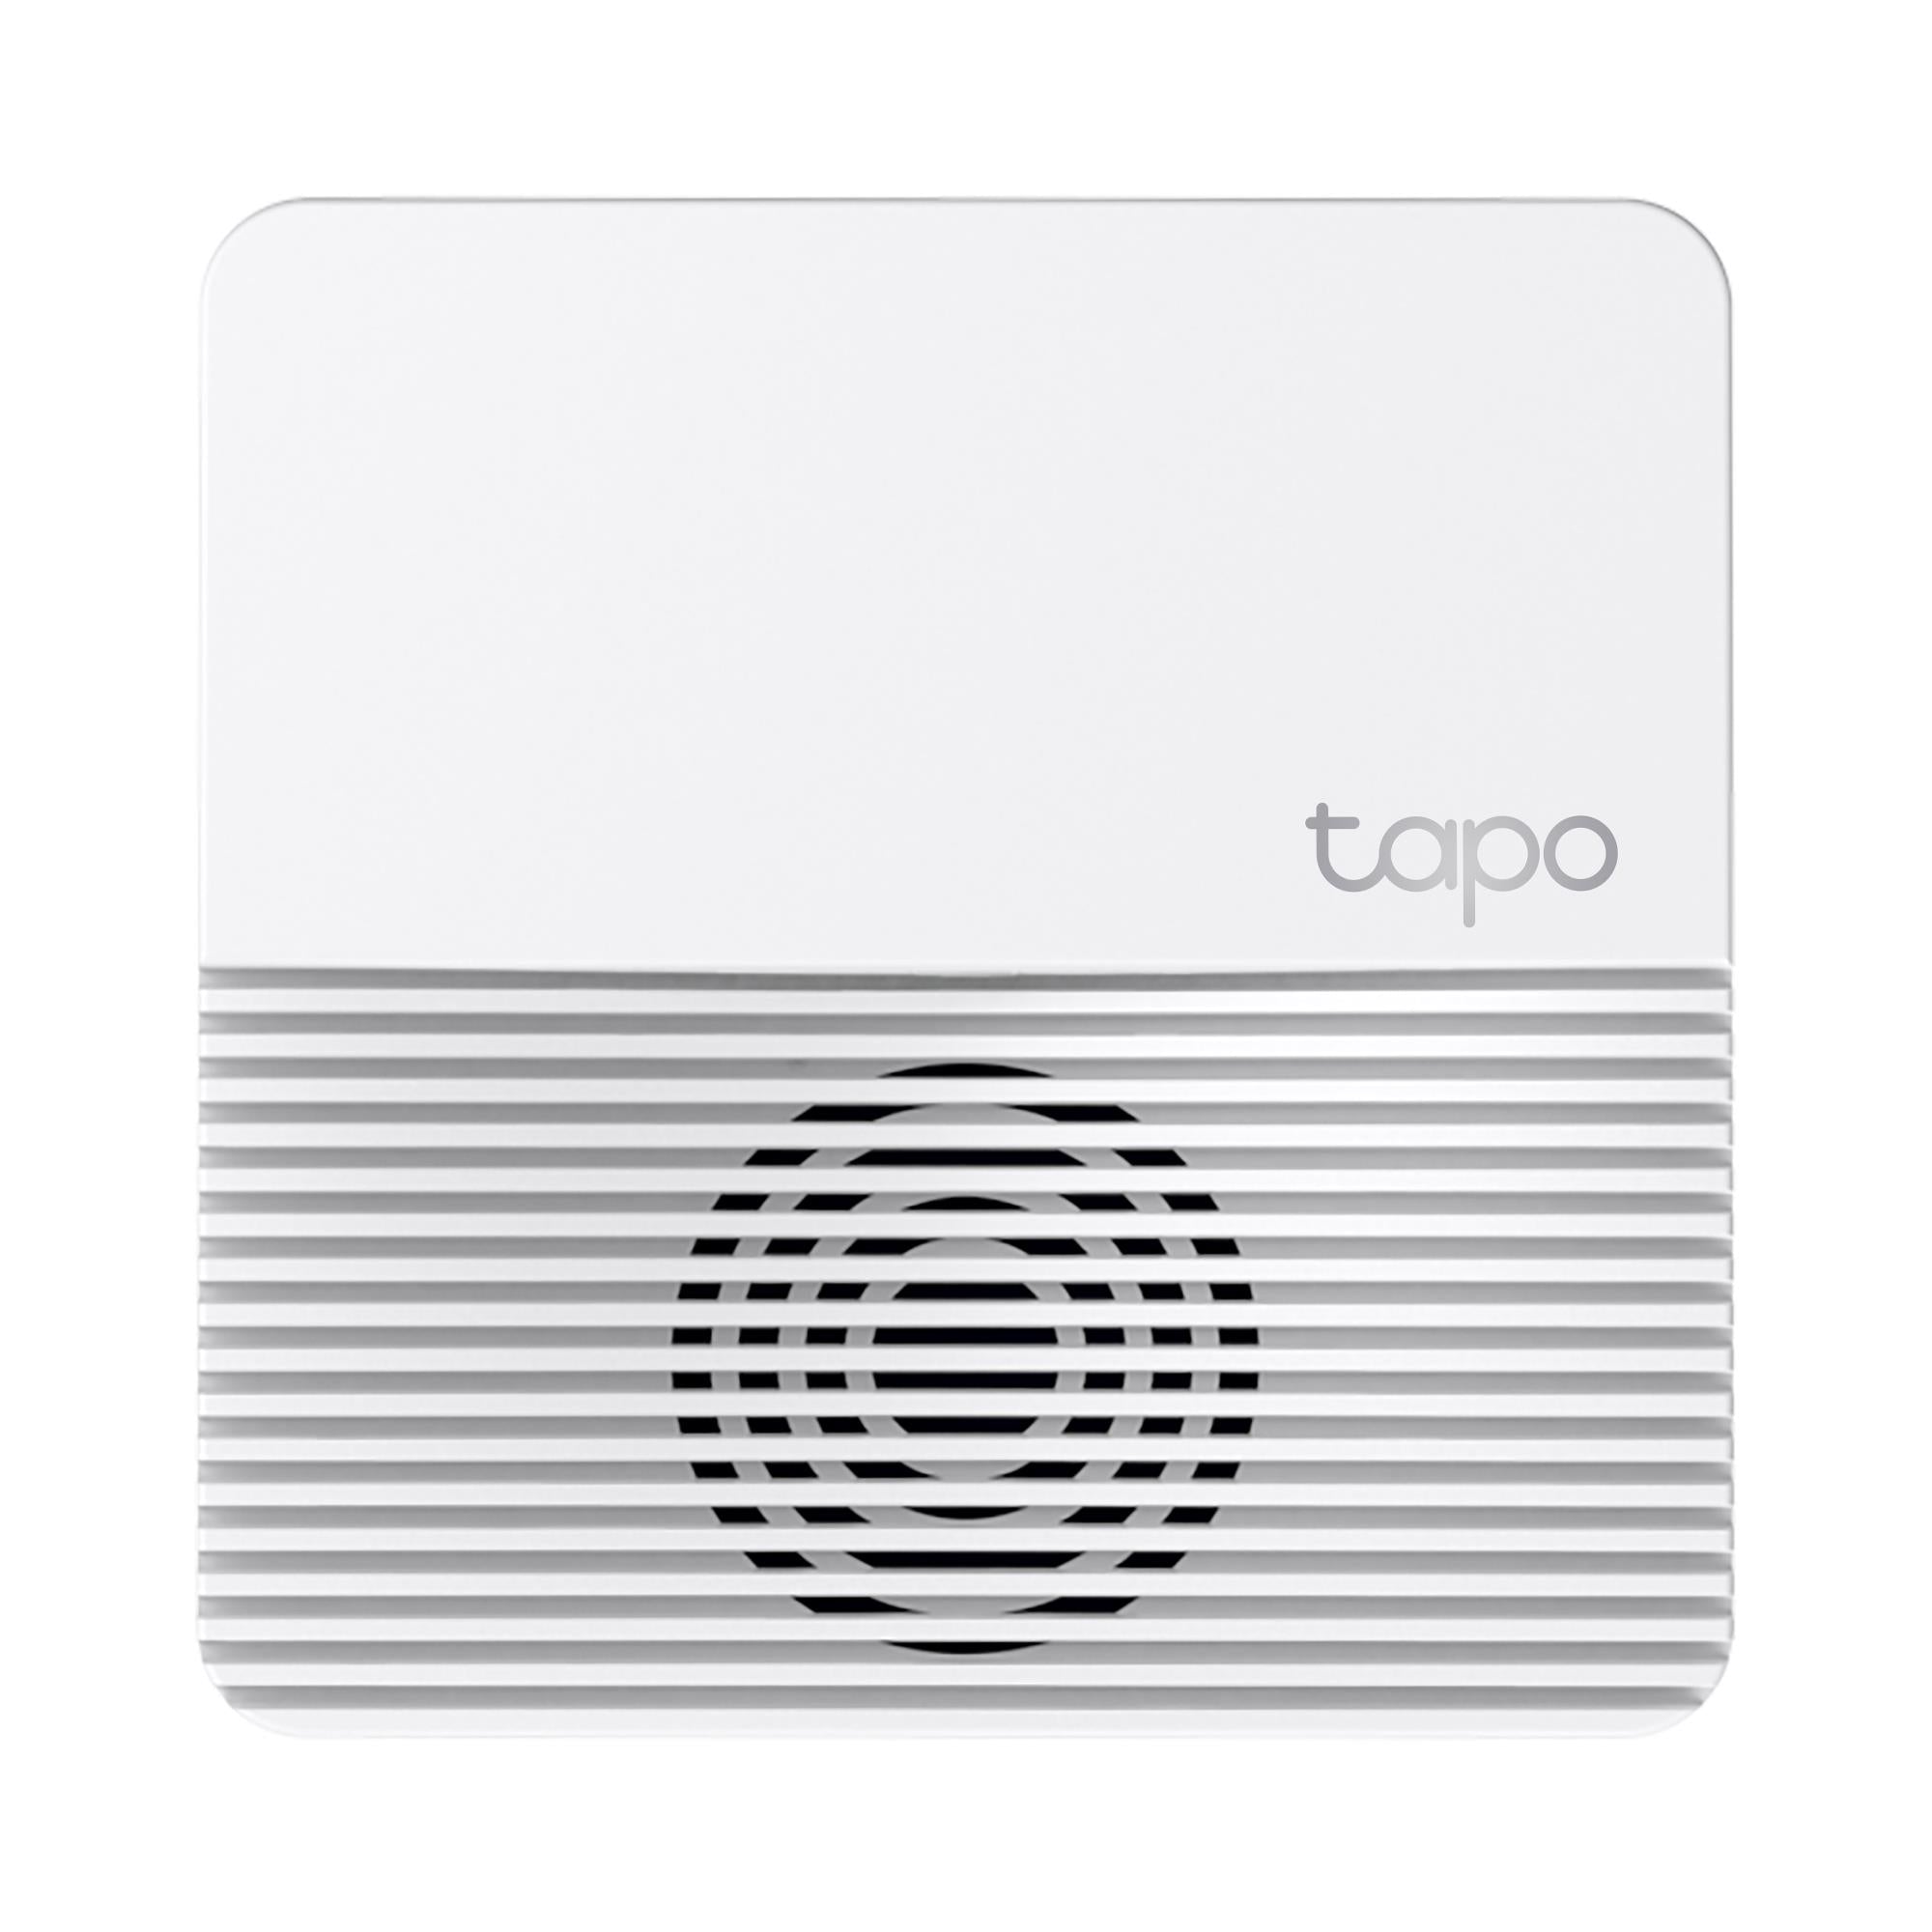 TP-Link Tapo Smart Hub with Chime